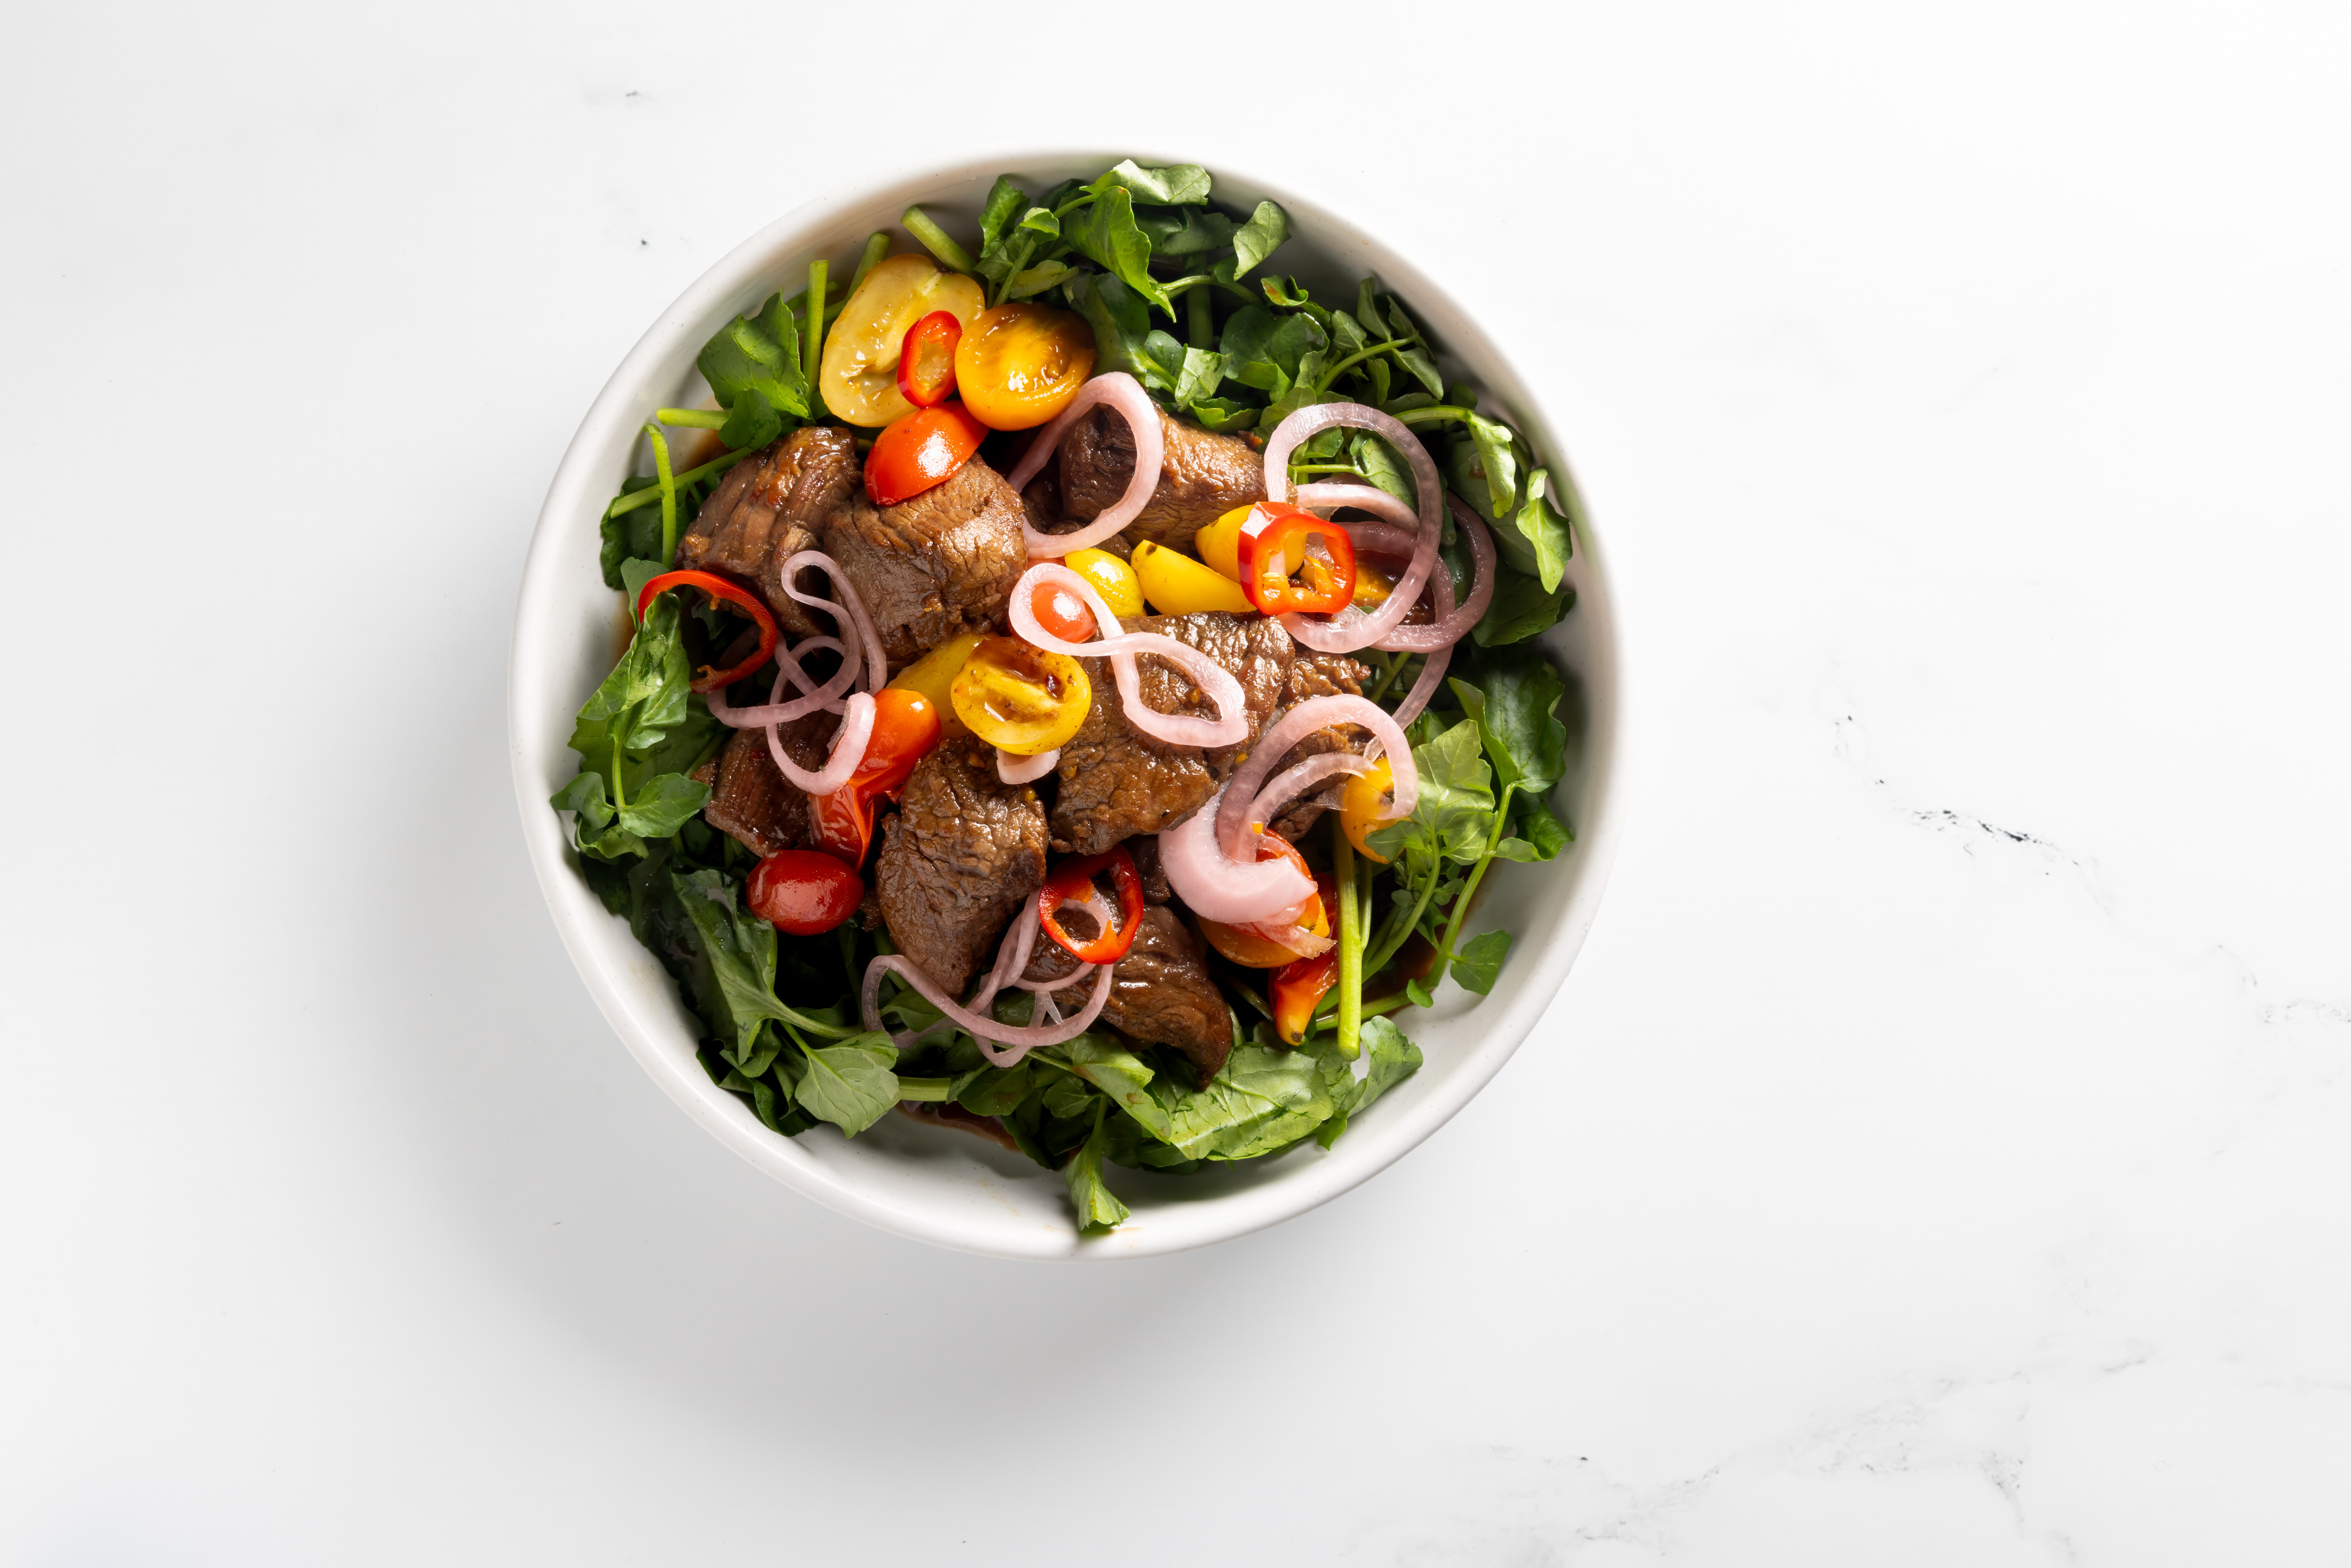 A bowl filled with marinated cuts of filet mignon and pickled onions and cherry tomatoes on a bed of lettuce.